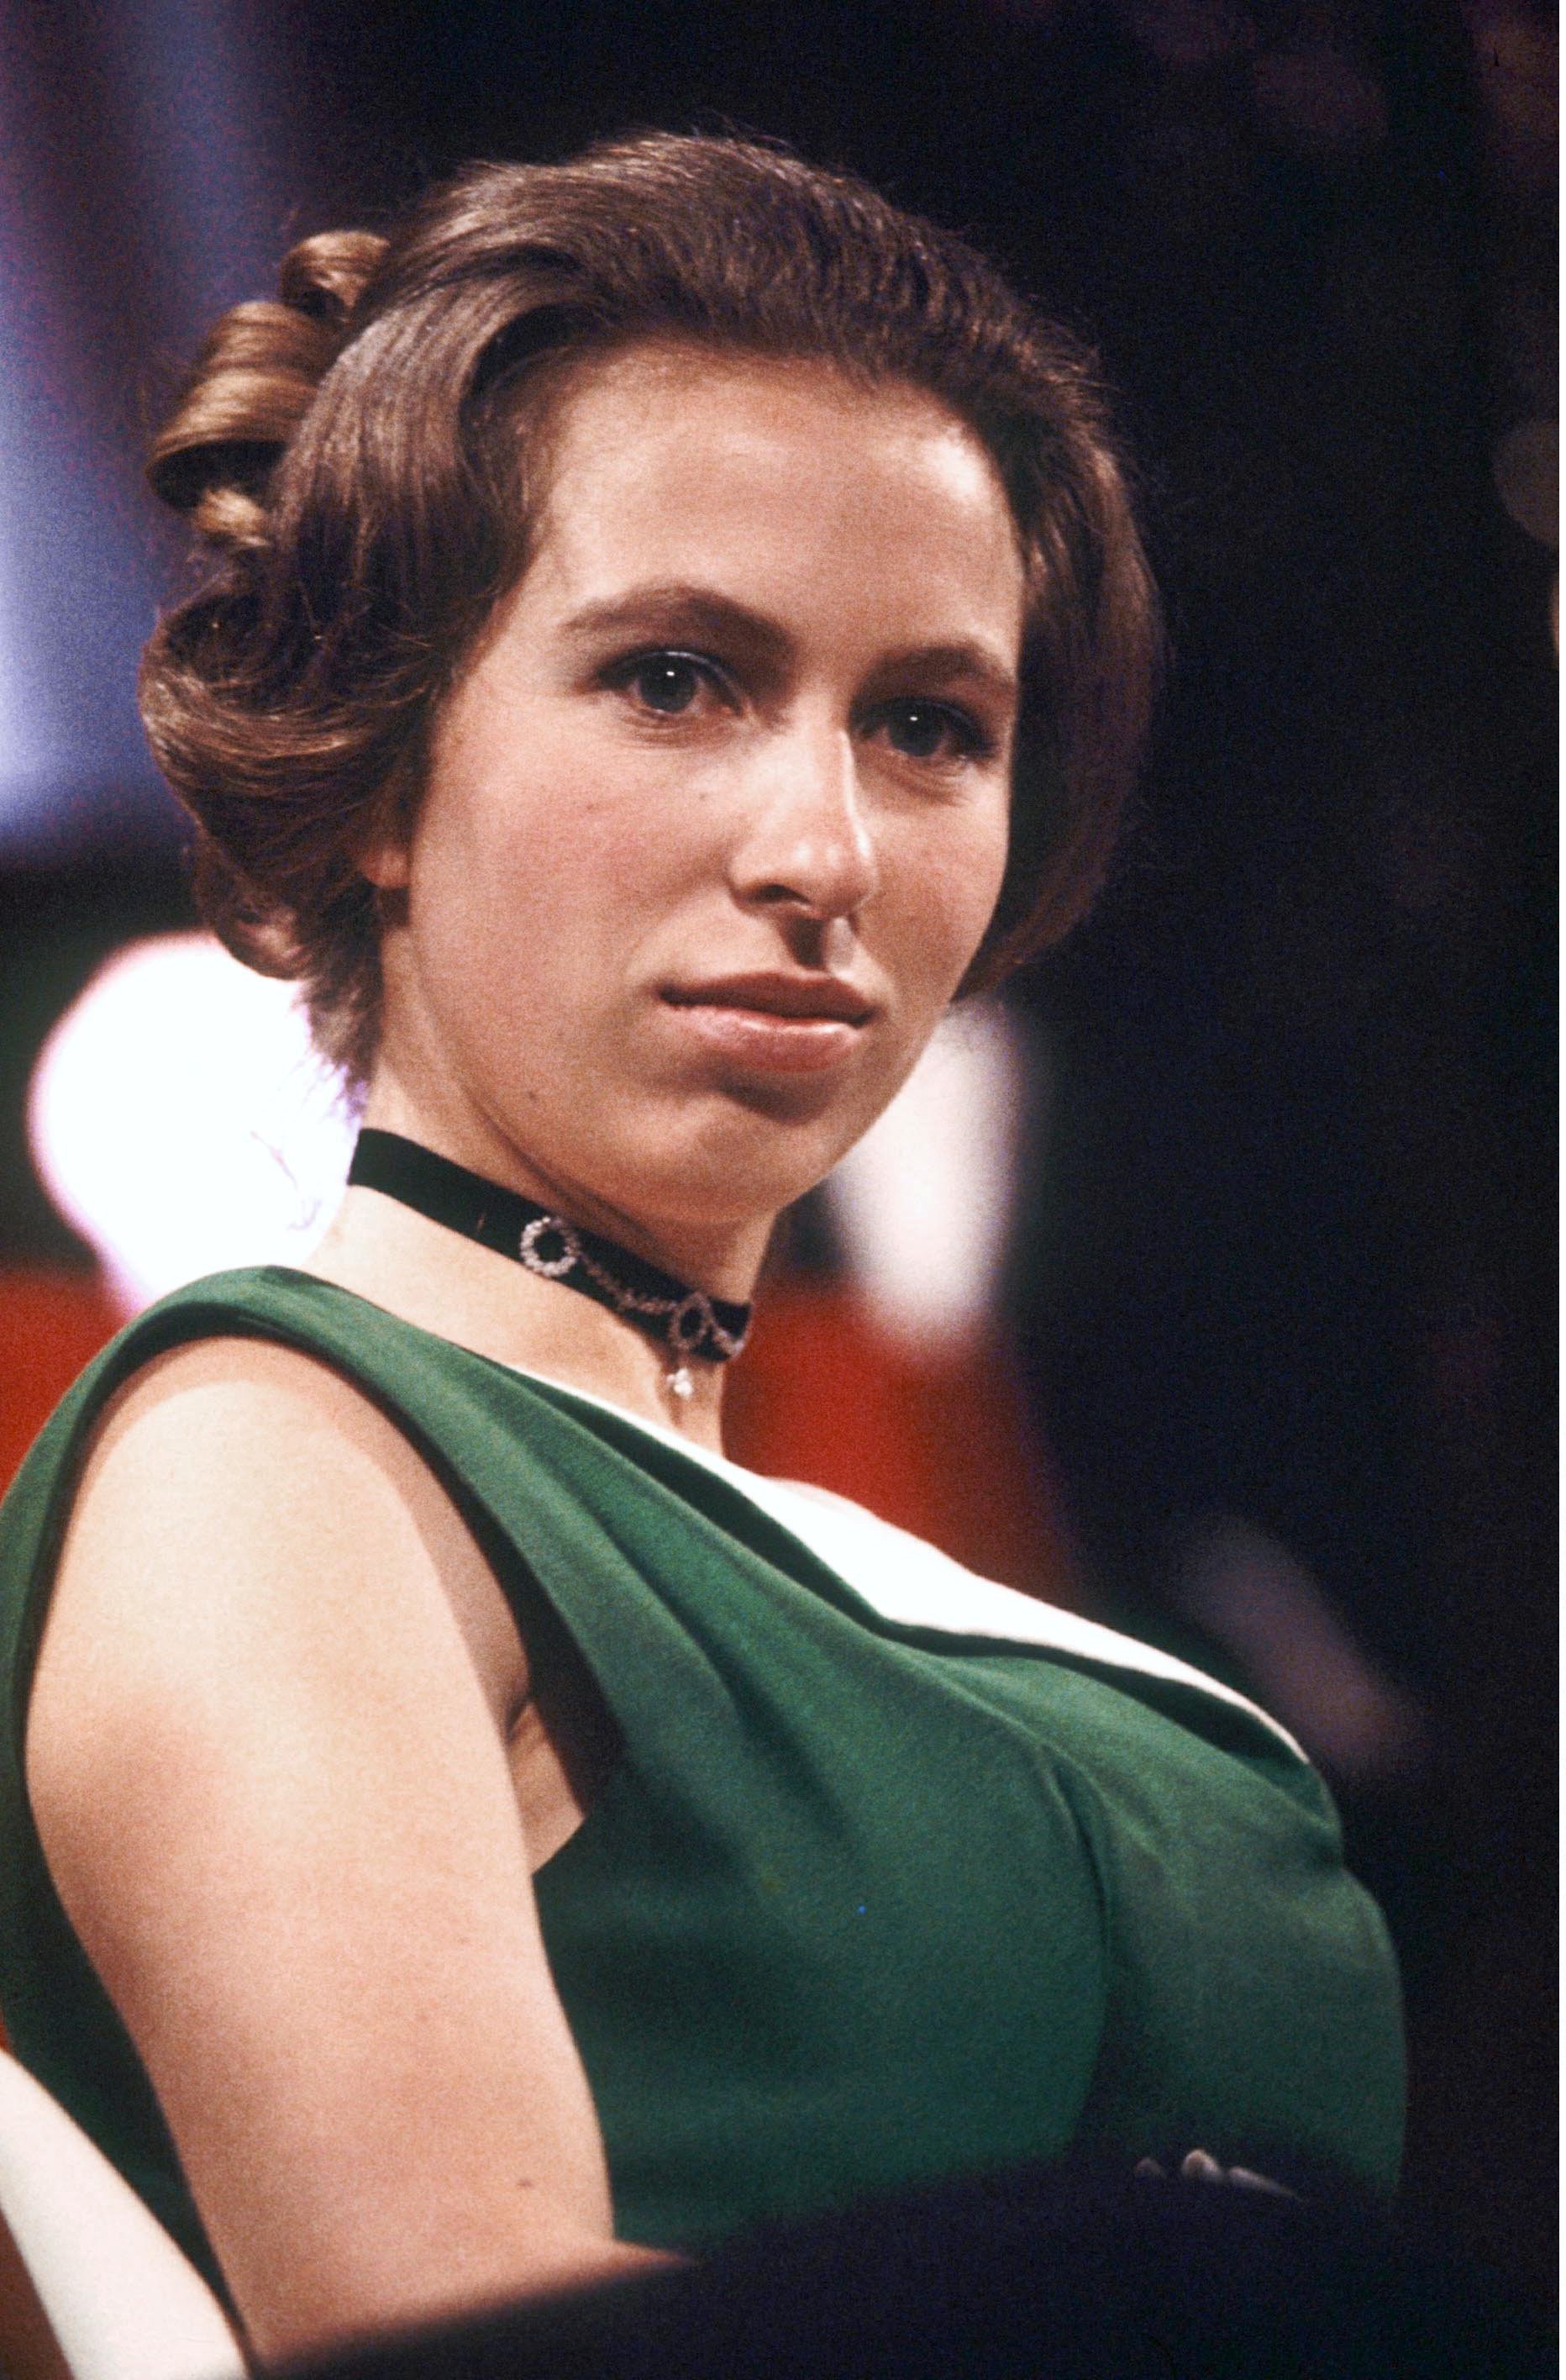 Princess Anne attends the Society of Film and Television Awards, which later became BAFTA on March 04, 1971, in London, England. | Source: Getty Images.